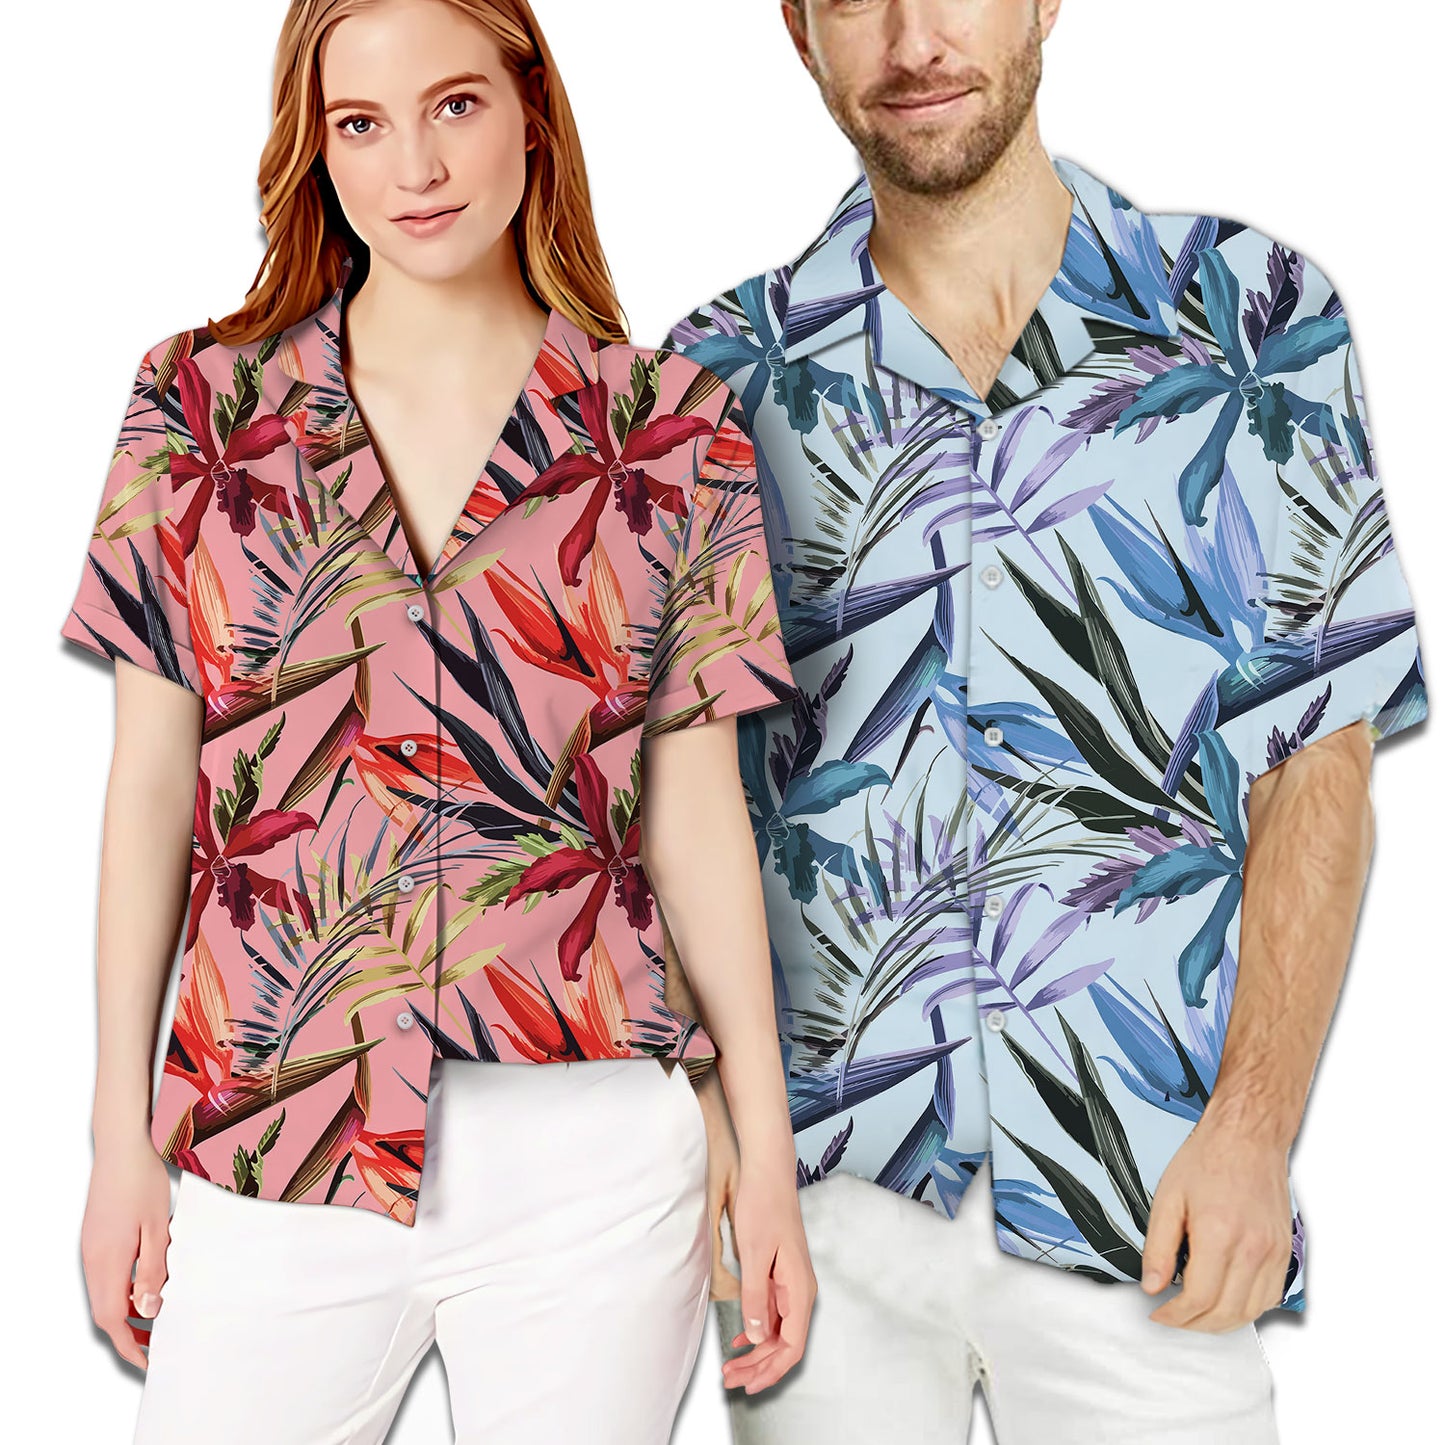 He Sees All My Light She Accepted All My Dark Matching Hawaiian Shirt Personalizedwitch For Couple